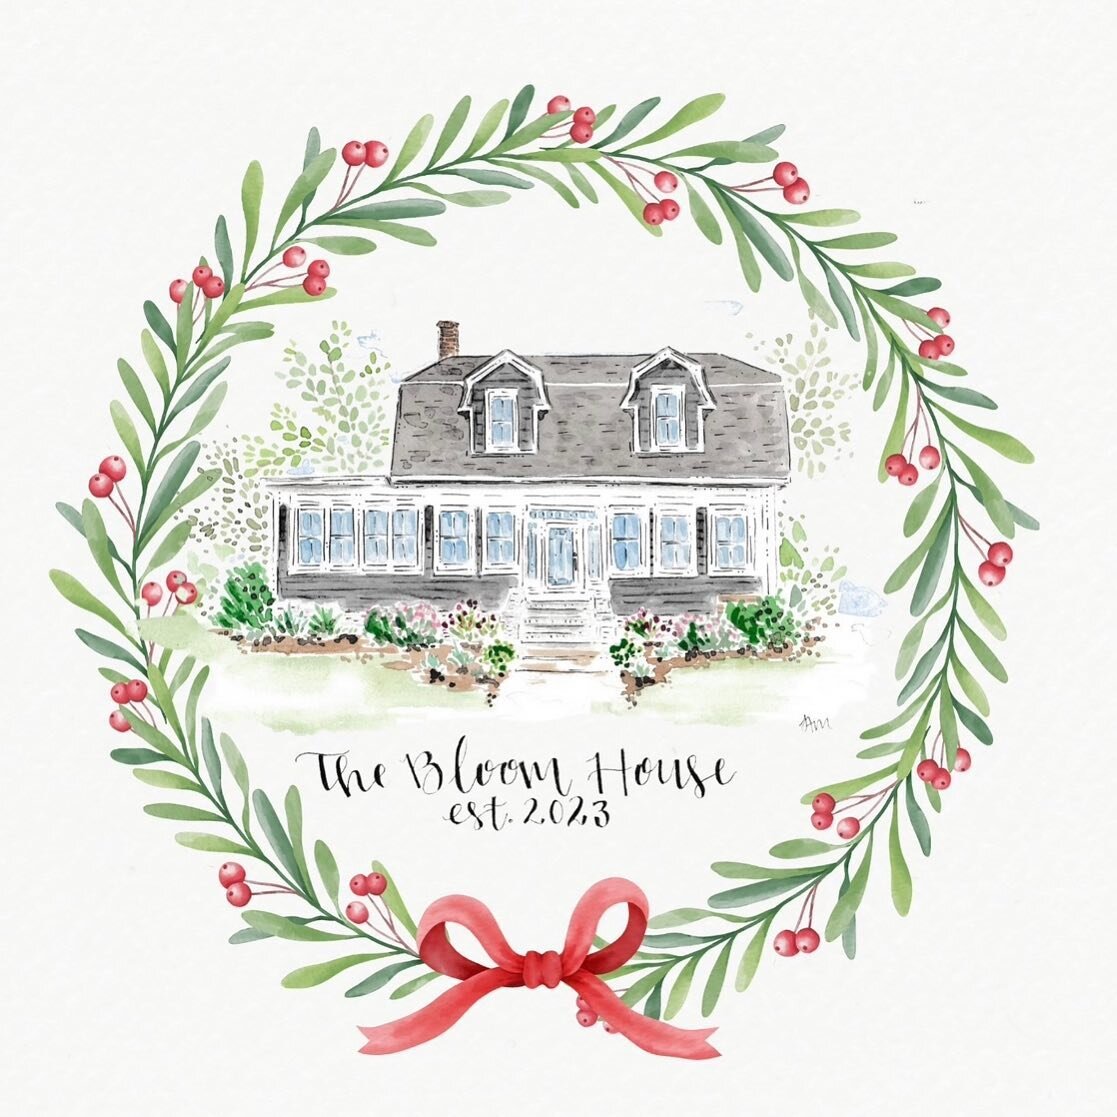 you *filled* 
the Bloom House 
with love this year.

thank you 
for being a part 
of our community.

wishing you 
a wonderful 
holiday season 
and a beautiful 
year to come.

&mdash;&mdash;

We are out of the office this week and we will be returning